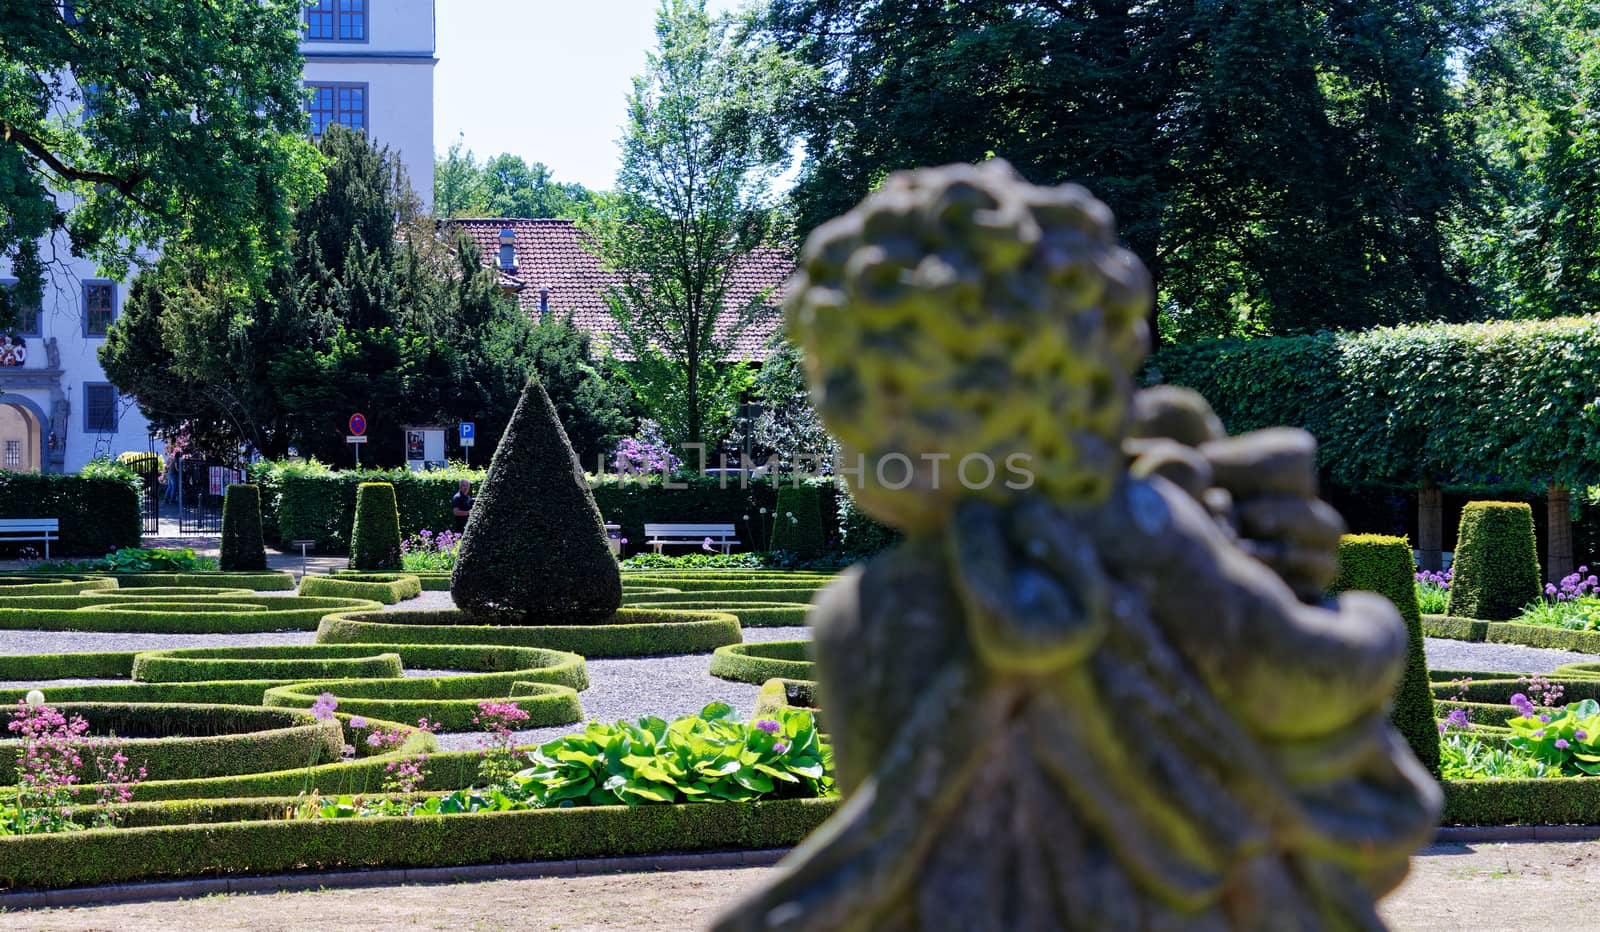 Baroque garden with a deliberately blurred stone figure in the foreground, germany